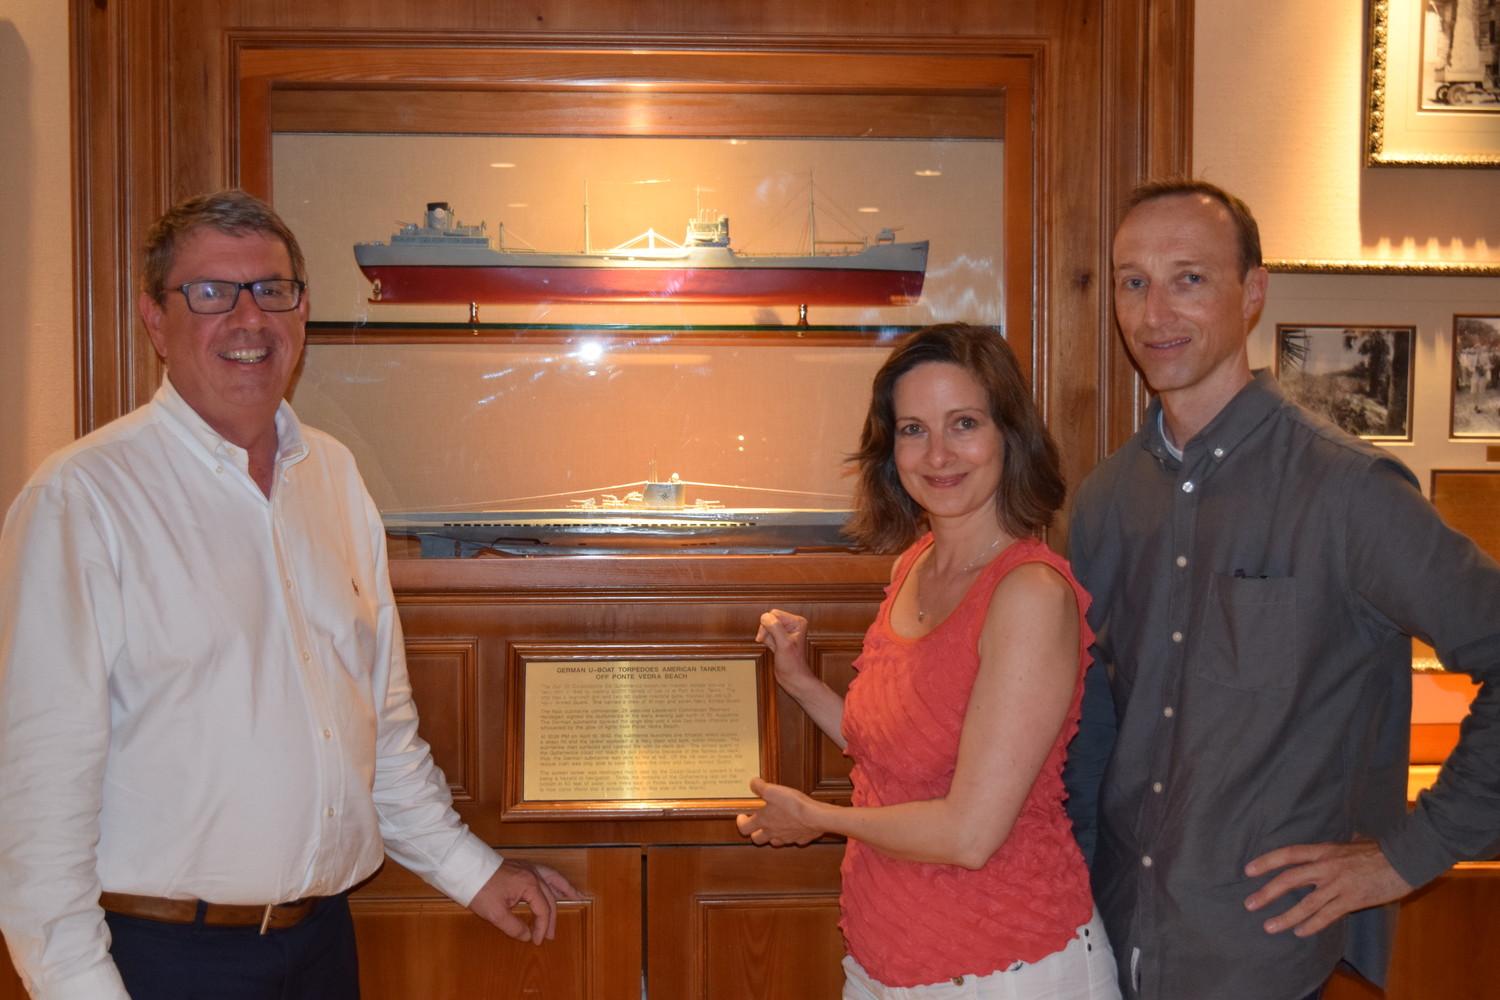 Local historian Scott Grant recently hosted some special guests at a presentation he delivered on the 1942 Nazi U-boat sinking of the SS Gulf America oil tanker off the coast of Jacksonville Beach. Displayed with Grant (left) is Katrin Nielsen of Holland (center), the granddaughter of the chief engineer of the U-boat, and Henrik Henriksen, a European expert on the Nazi U-boat campaign. Together, Nielsen and Henriksen have discovered artifacts that detailed her grandfather’s experiences during the war. While in town, Grant showed them the local landmarks the Nazis used to navigate the waters.